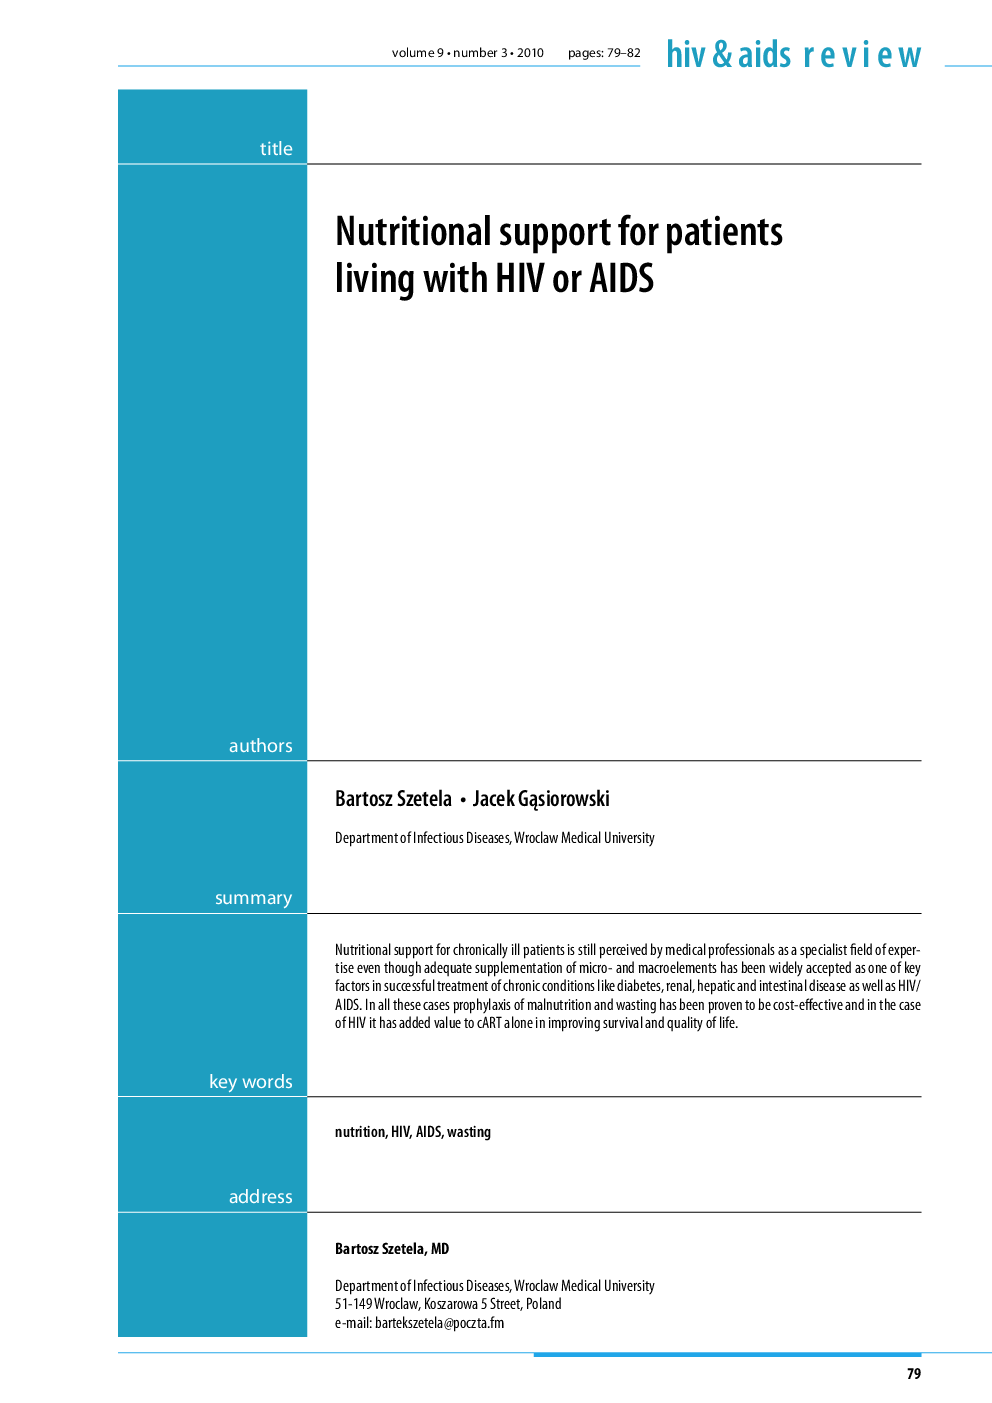 Nutritional support for patients living with HIV or AIDS